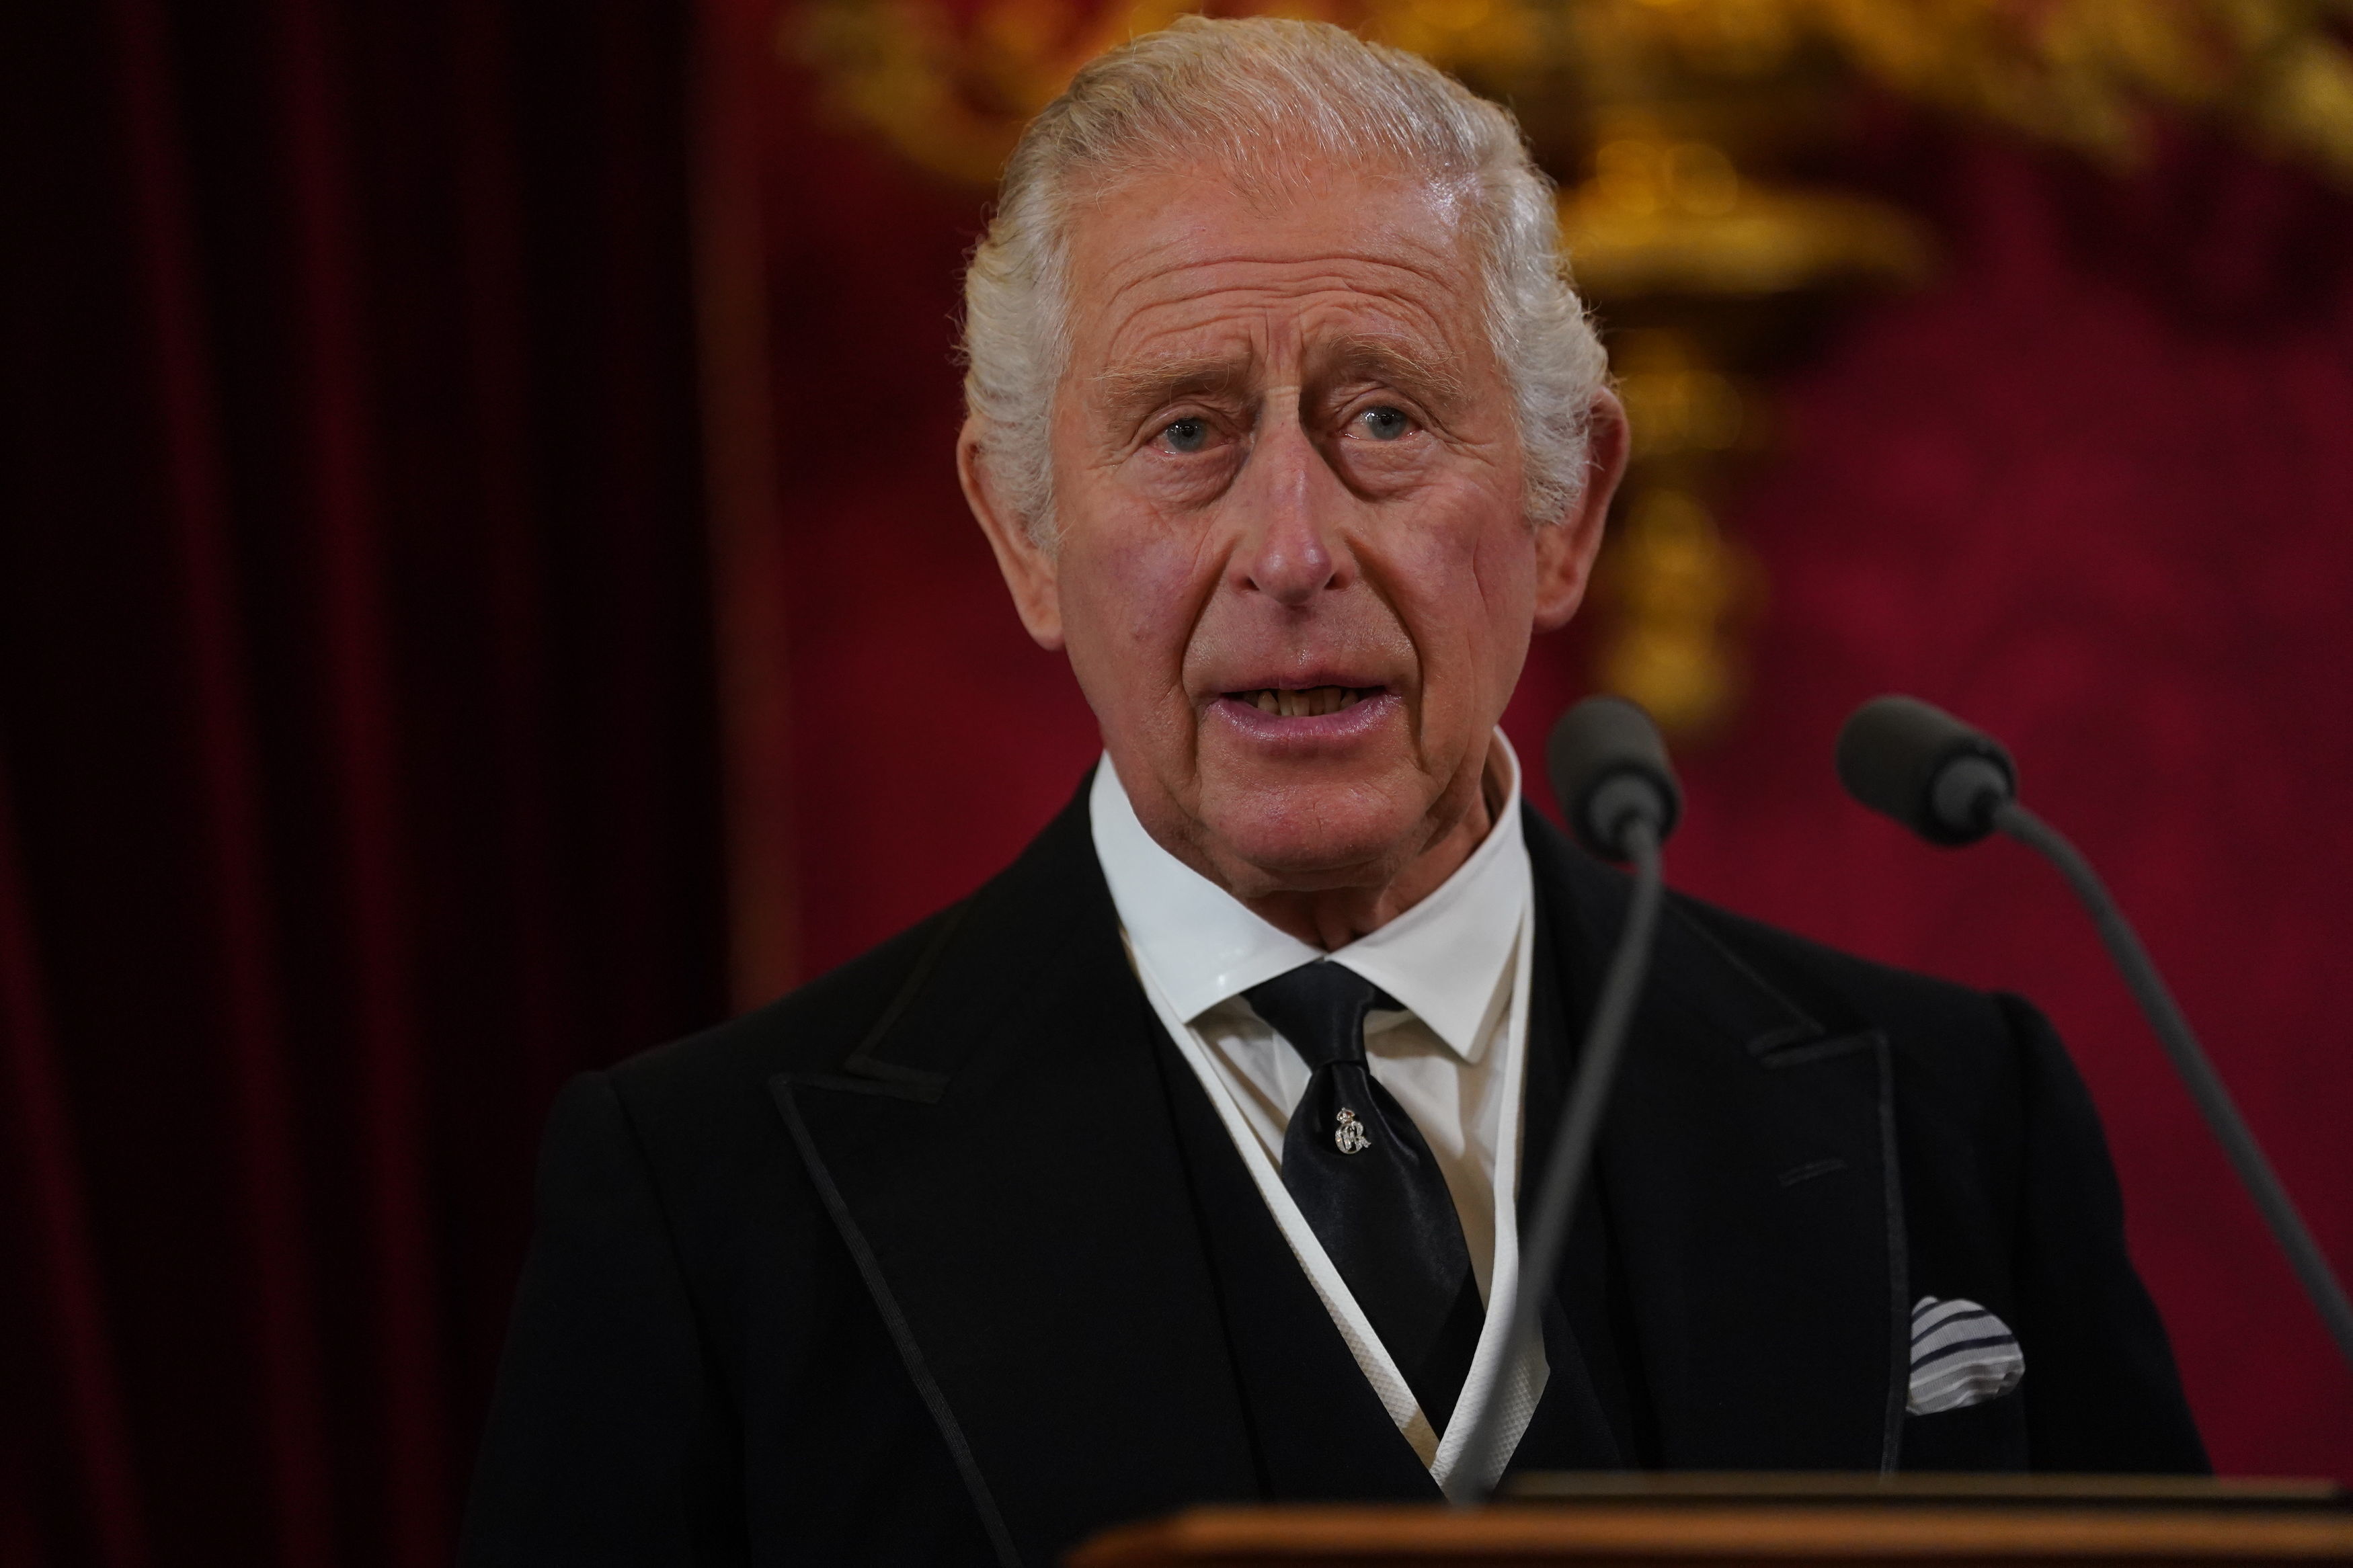 <p>King Charles III spoke after the Accession Council formally proclaimed him king in the throne room at St. James's Palace in London on Sept. 10, 2022. In his remarks, he honored his mother, Queen Elizabeth II -- who died two days earlier in Scotland -- and told those assembled, "My mother's reign was unequalled in its duration, its dedication and its devotion. Even as we grieve, we give thanks for this most faithful life. I am deeply aware of this great inheritance and of the duties and heavy responsibilities of Sovereignty which have now passed to me." He also thanked his spouse and promised to continue the same financial arrangement his mother had with the government. "In all this, I am profoundly encouraged by the constant support of my beloved wife," Charles said. "I take this opportunity to confirm my willingness and intention to continue the tradition of surrendering the hereditary revenues, including the Crown Estate, to my government for the benefit of all, in return for the Sovereign Grant, which supports my official duties as head of state and head of nation." he concluded his remarks, "And in carrying out the heavy task that has been laid upon me, and to which I now dedicate what remains to me of my life, I pray for the guidance and help of Almighty God."</p>